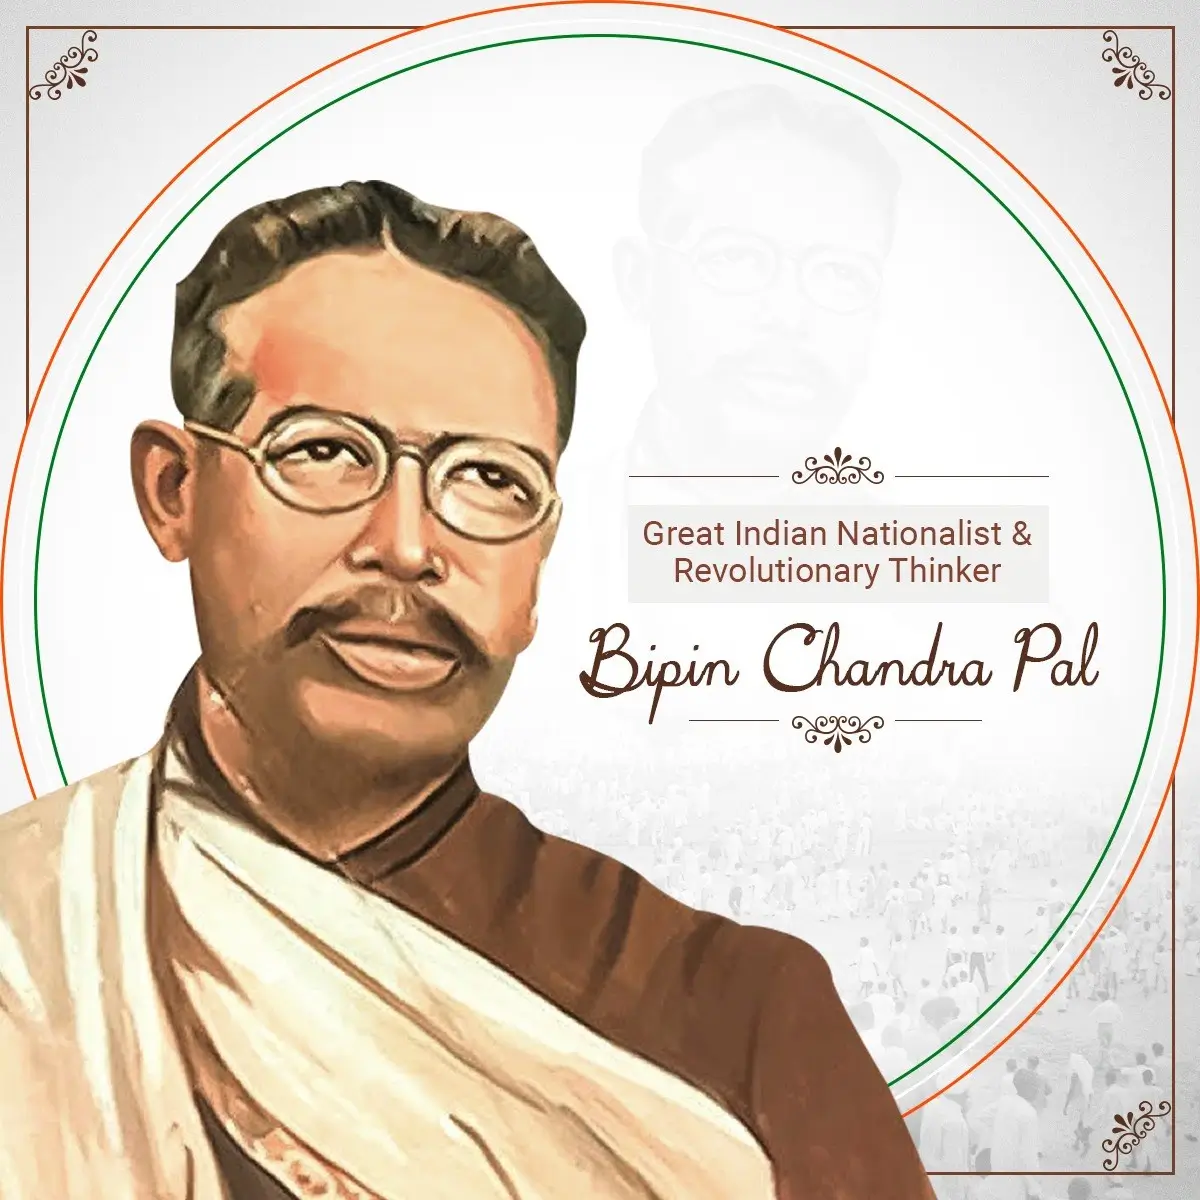 Bipin Chandra Pal Father of Revolutionary Thoughts in India